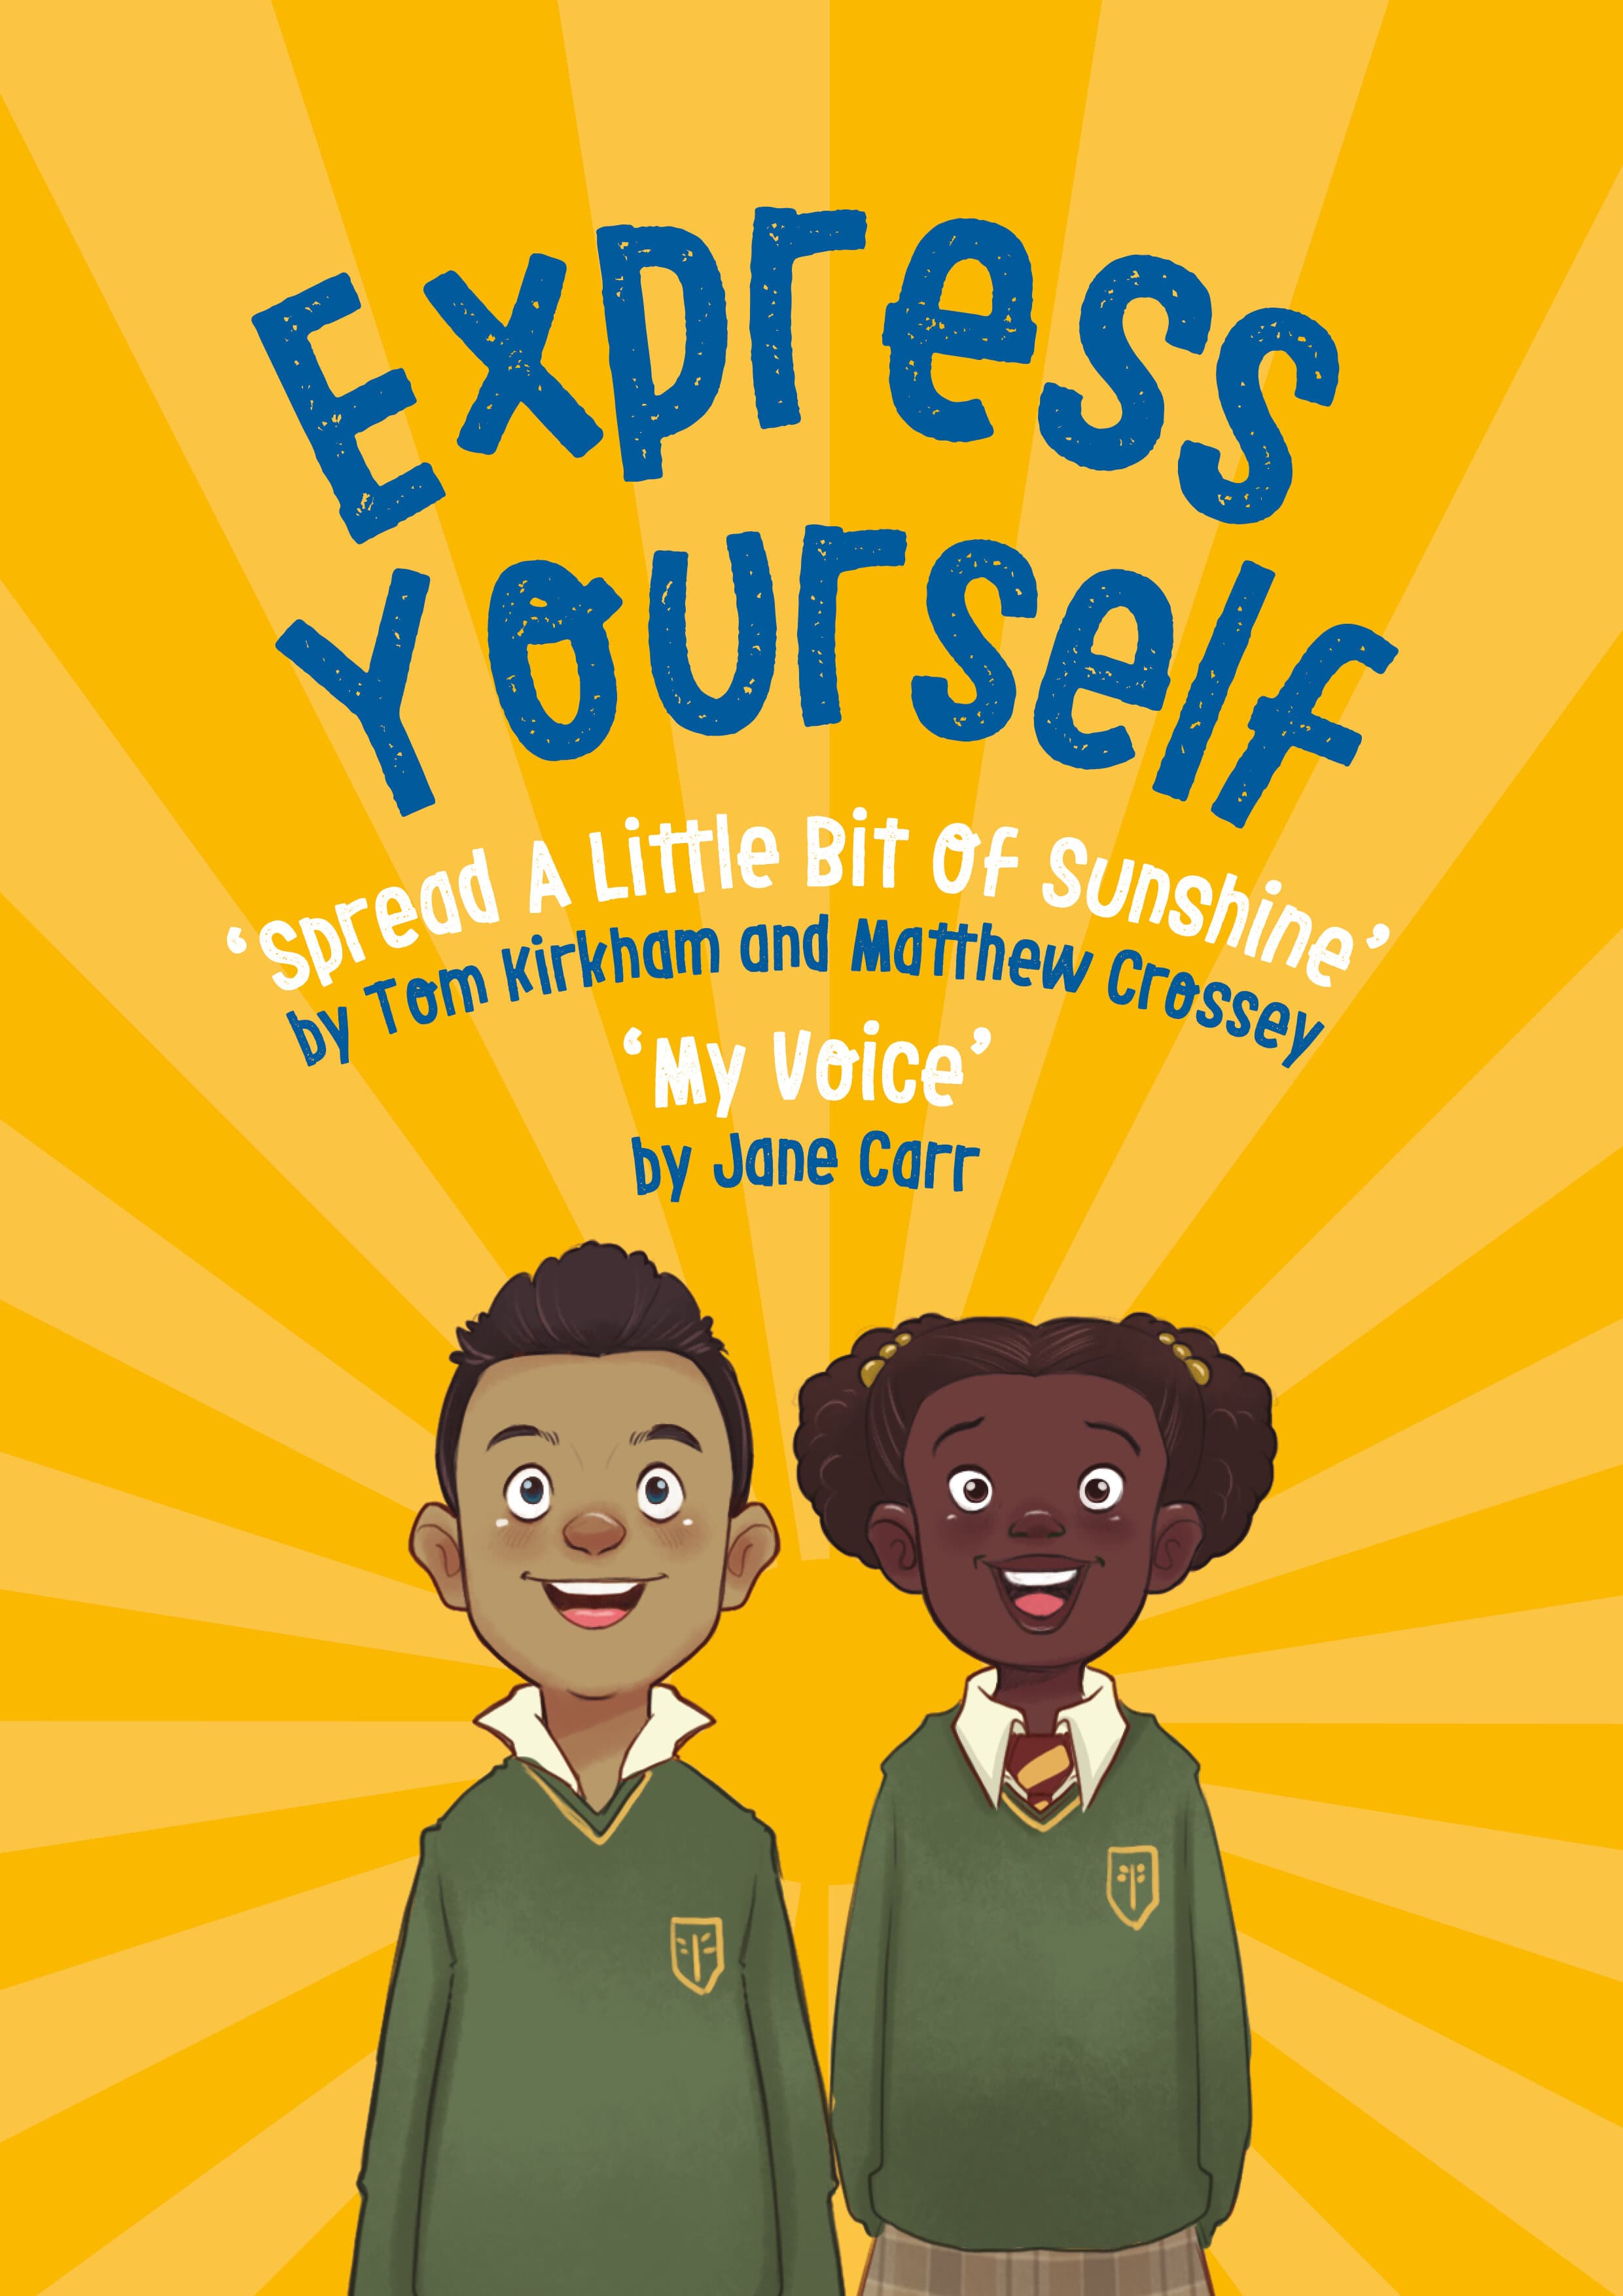 Express Yourself - Song Download Pack - 100% Discount With Code EXP100